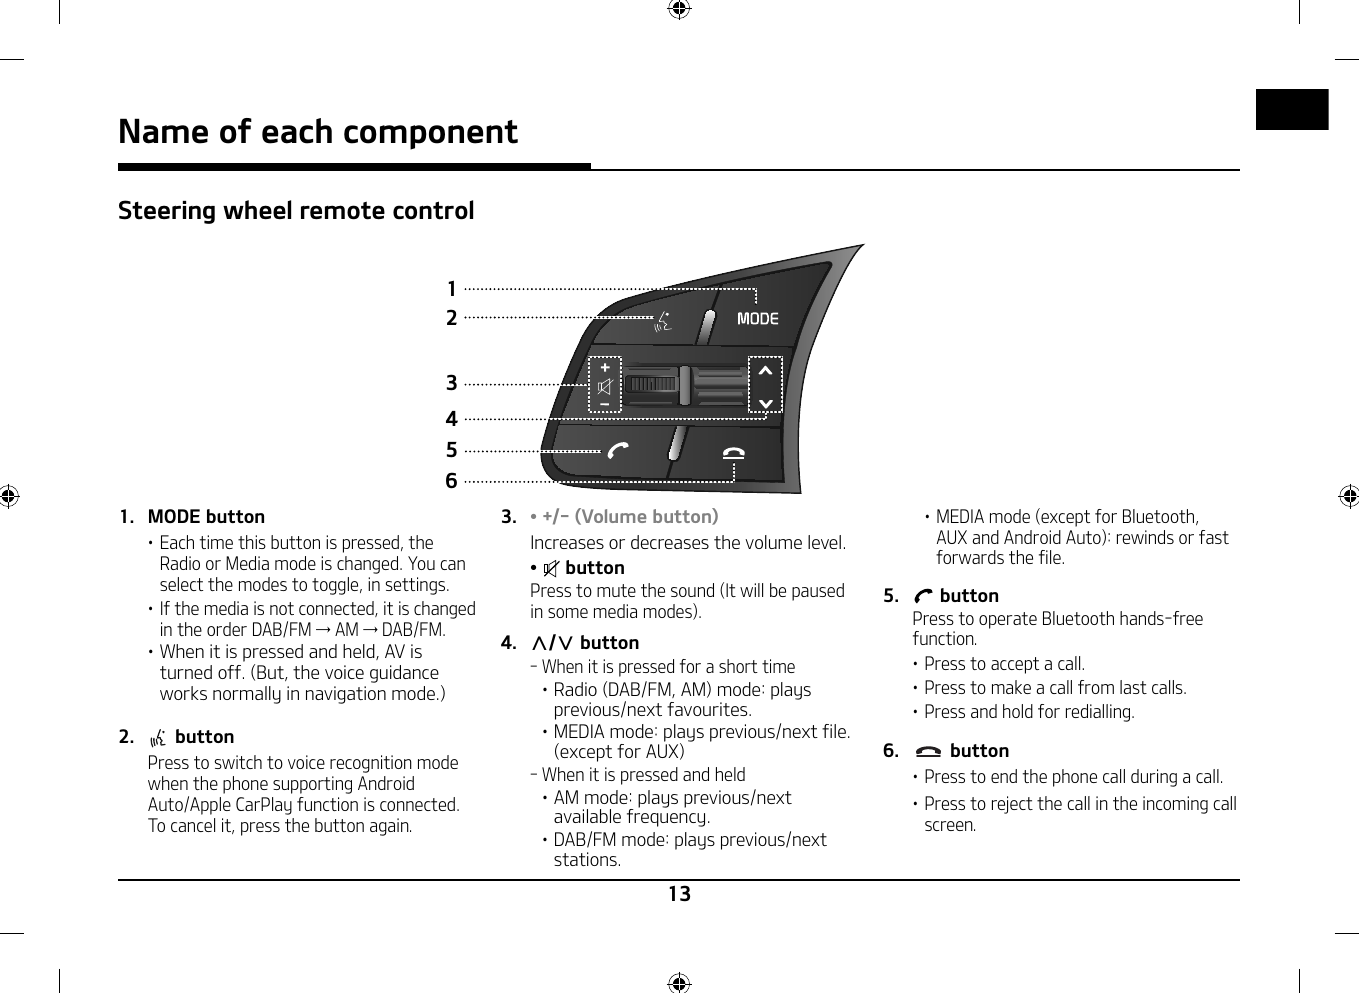 13Name of each componentSteering wheel remote control1265341.  MODE button 䳜 Each time this button is pressed, the Radio or Media mode is changed. You can select the modes to toggle, in settings.䳜 If the media is not connected, it is changed in the order DAB/FM → AM → DAB/FM.䳜 When it is pressed and held, AV is turned off. (But, the voice guidance works normally in navigation mode.)2.   button   Press to switch to voice recognition mode when the phone supporting Android Auto/Apple CarPlay function is connected.To cancel it, press the button again.3.  䳜 +/- (Volume button)  Increases or decreases the volume level. 䳜   button  Press to mute the sound (It will be paused in some media modes).4.  W/S button ‐ When it is pressed for a short time 䳜 Radio (DAB/FM, AM) mode: plays previous/next favourites.䳜 MEDIA mode: plays previous/next file. (except for AUX)  ‐ When it is pressed and held 䳜 AM mode: plays previous/next available frequency.䳜 DAB/FM mode: plays previous/next stations.䳜 MEDIA mode (except for Bluetooth, AUX and Android Auto): rewinds or fast forwards the file. 5.   button  Press to operate Bluetooth hands-free function.䳜 Press to accept a call.䳜 Press to make a call from last calls.䳜 Press and hold for redialling.6.   button䳜 Press to end the phone call during a call.䳜 Press to reject the call in the incoming call screen.